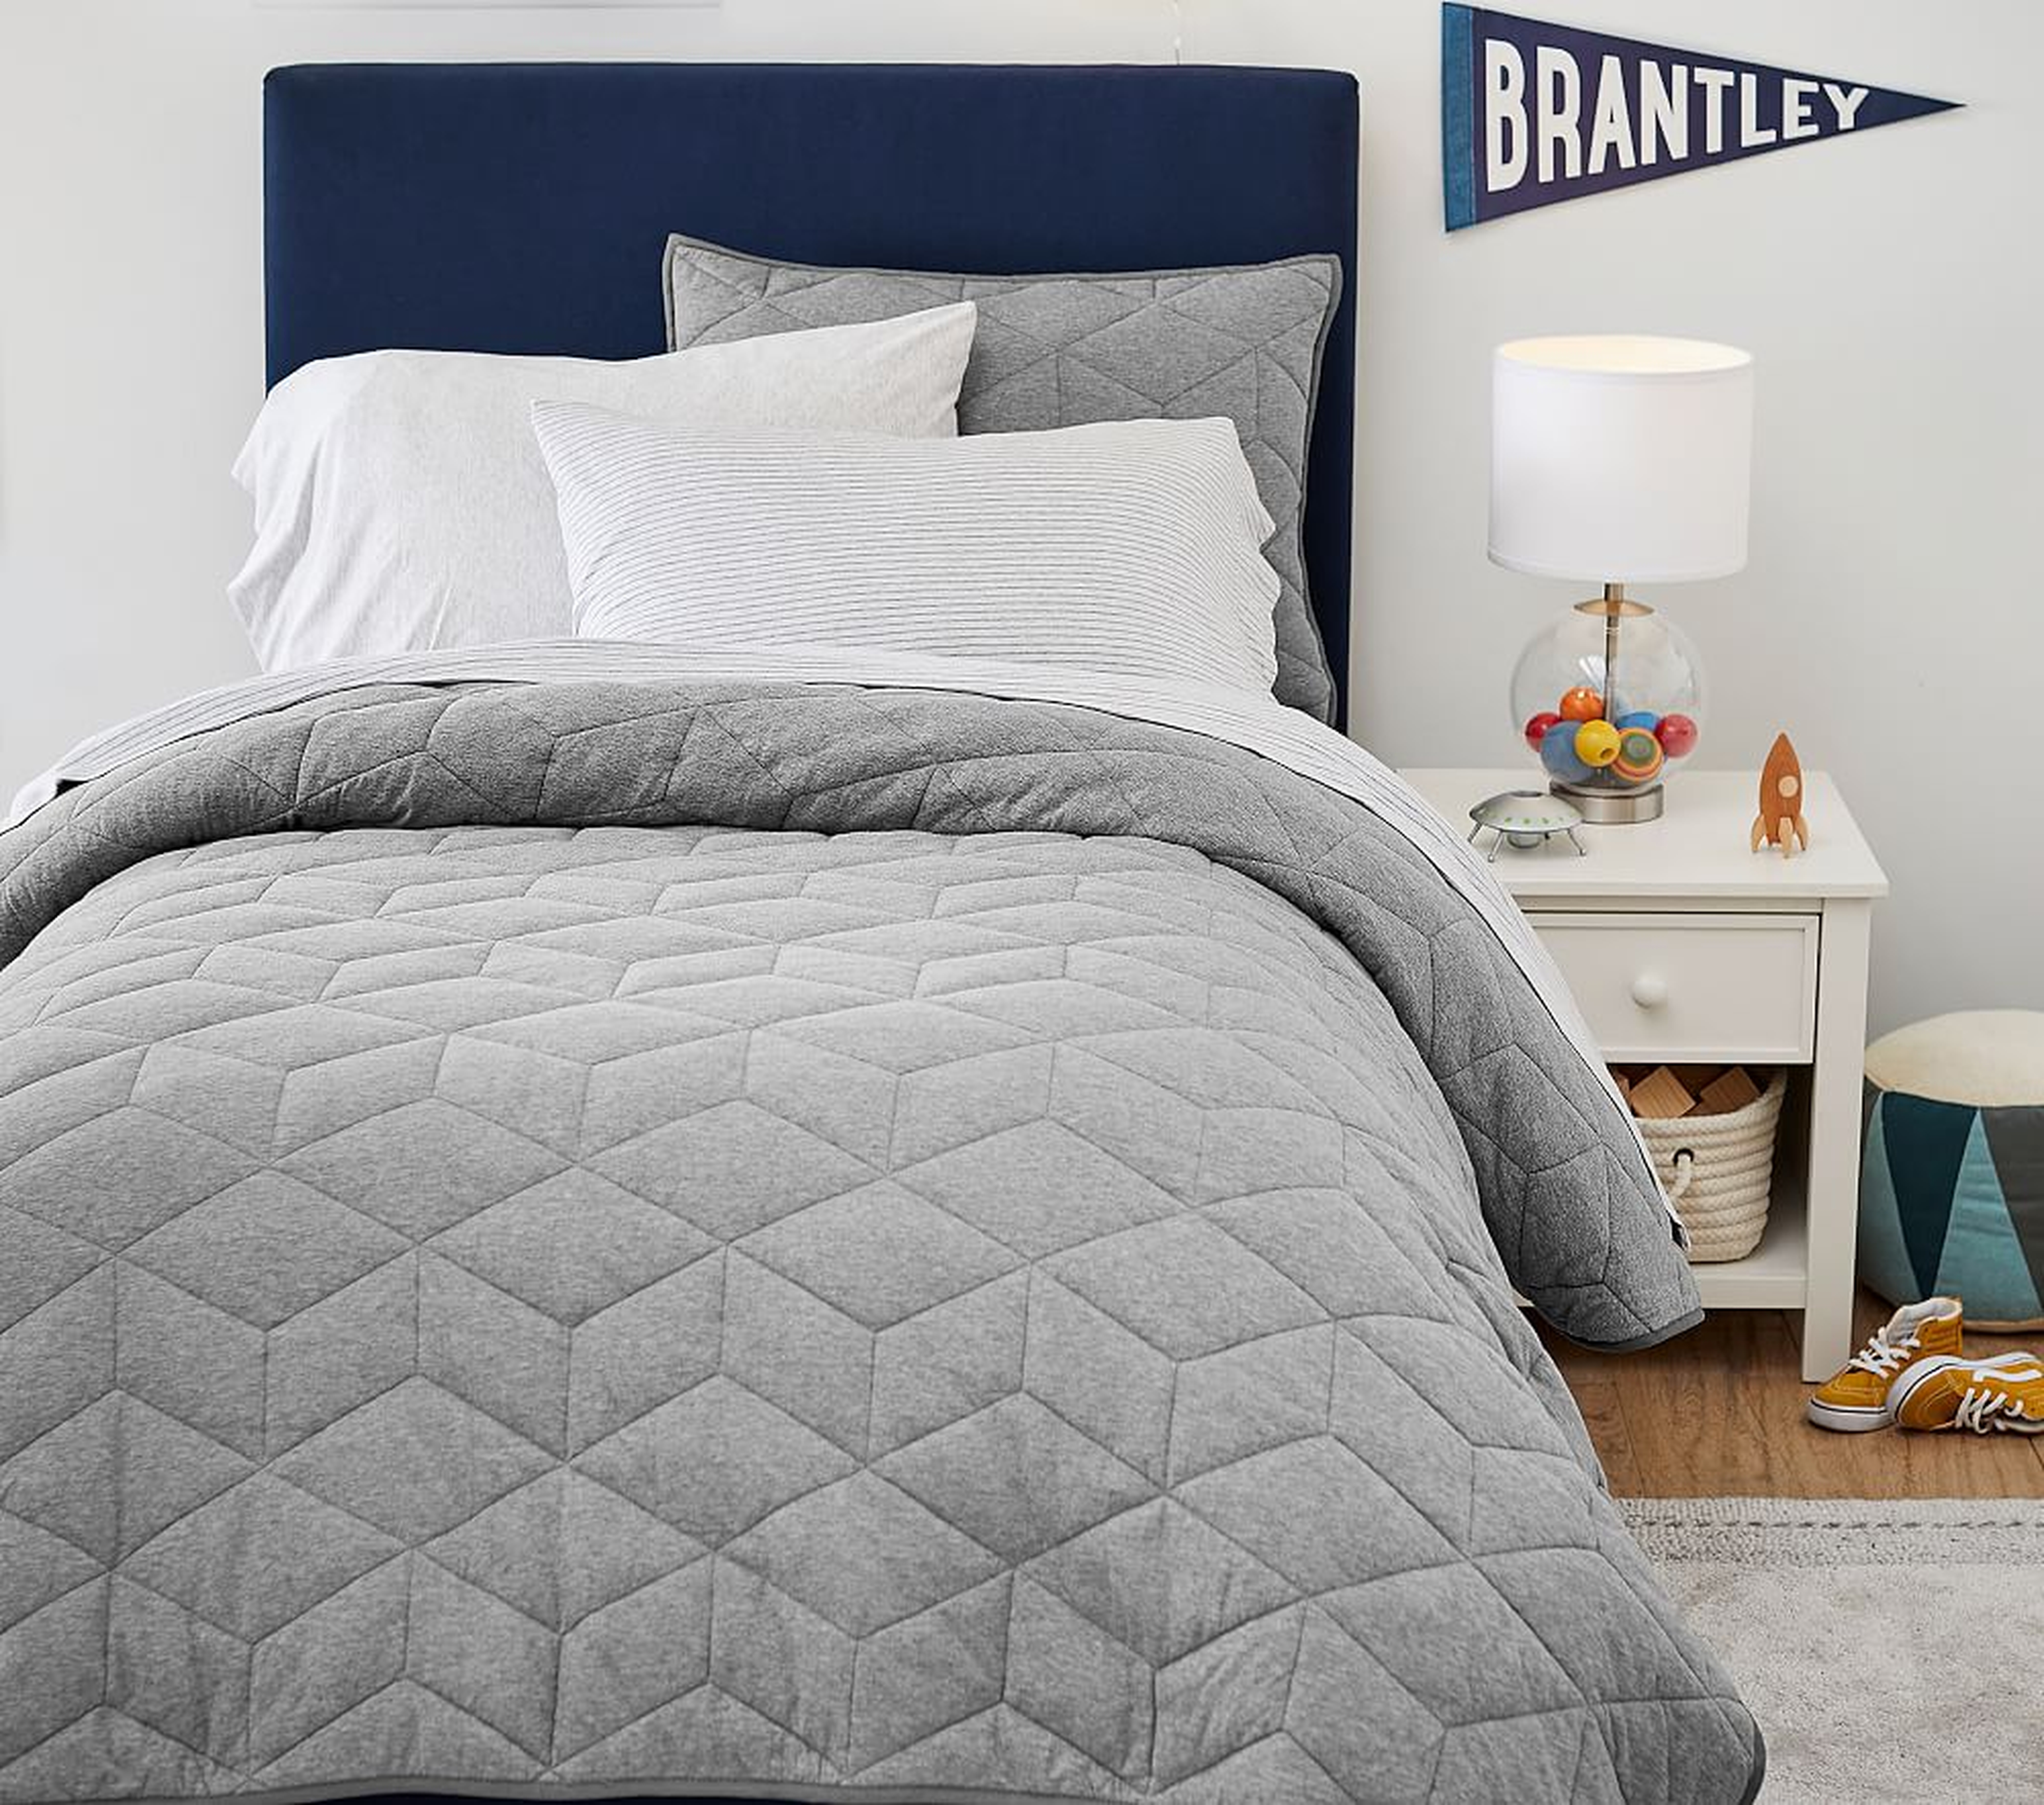 Jersey Quilt Twin Bedding Set, Gray - Pottery Barn Kids